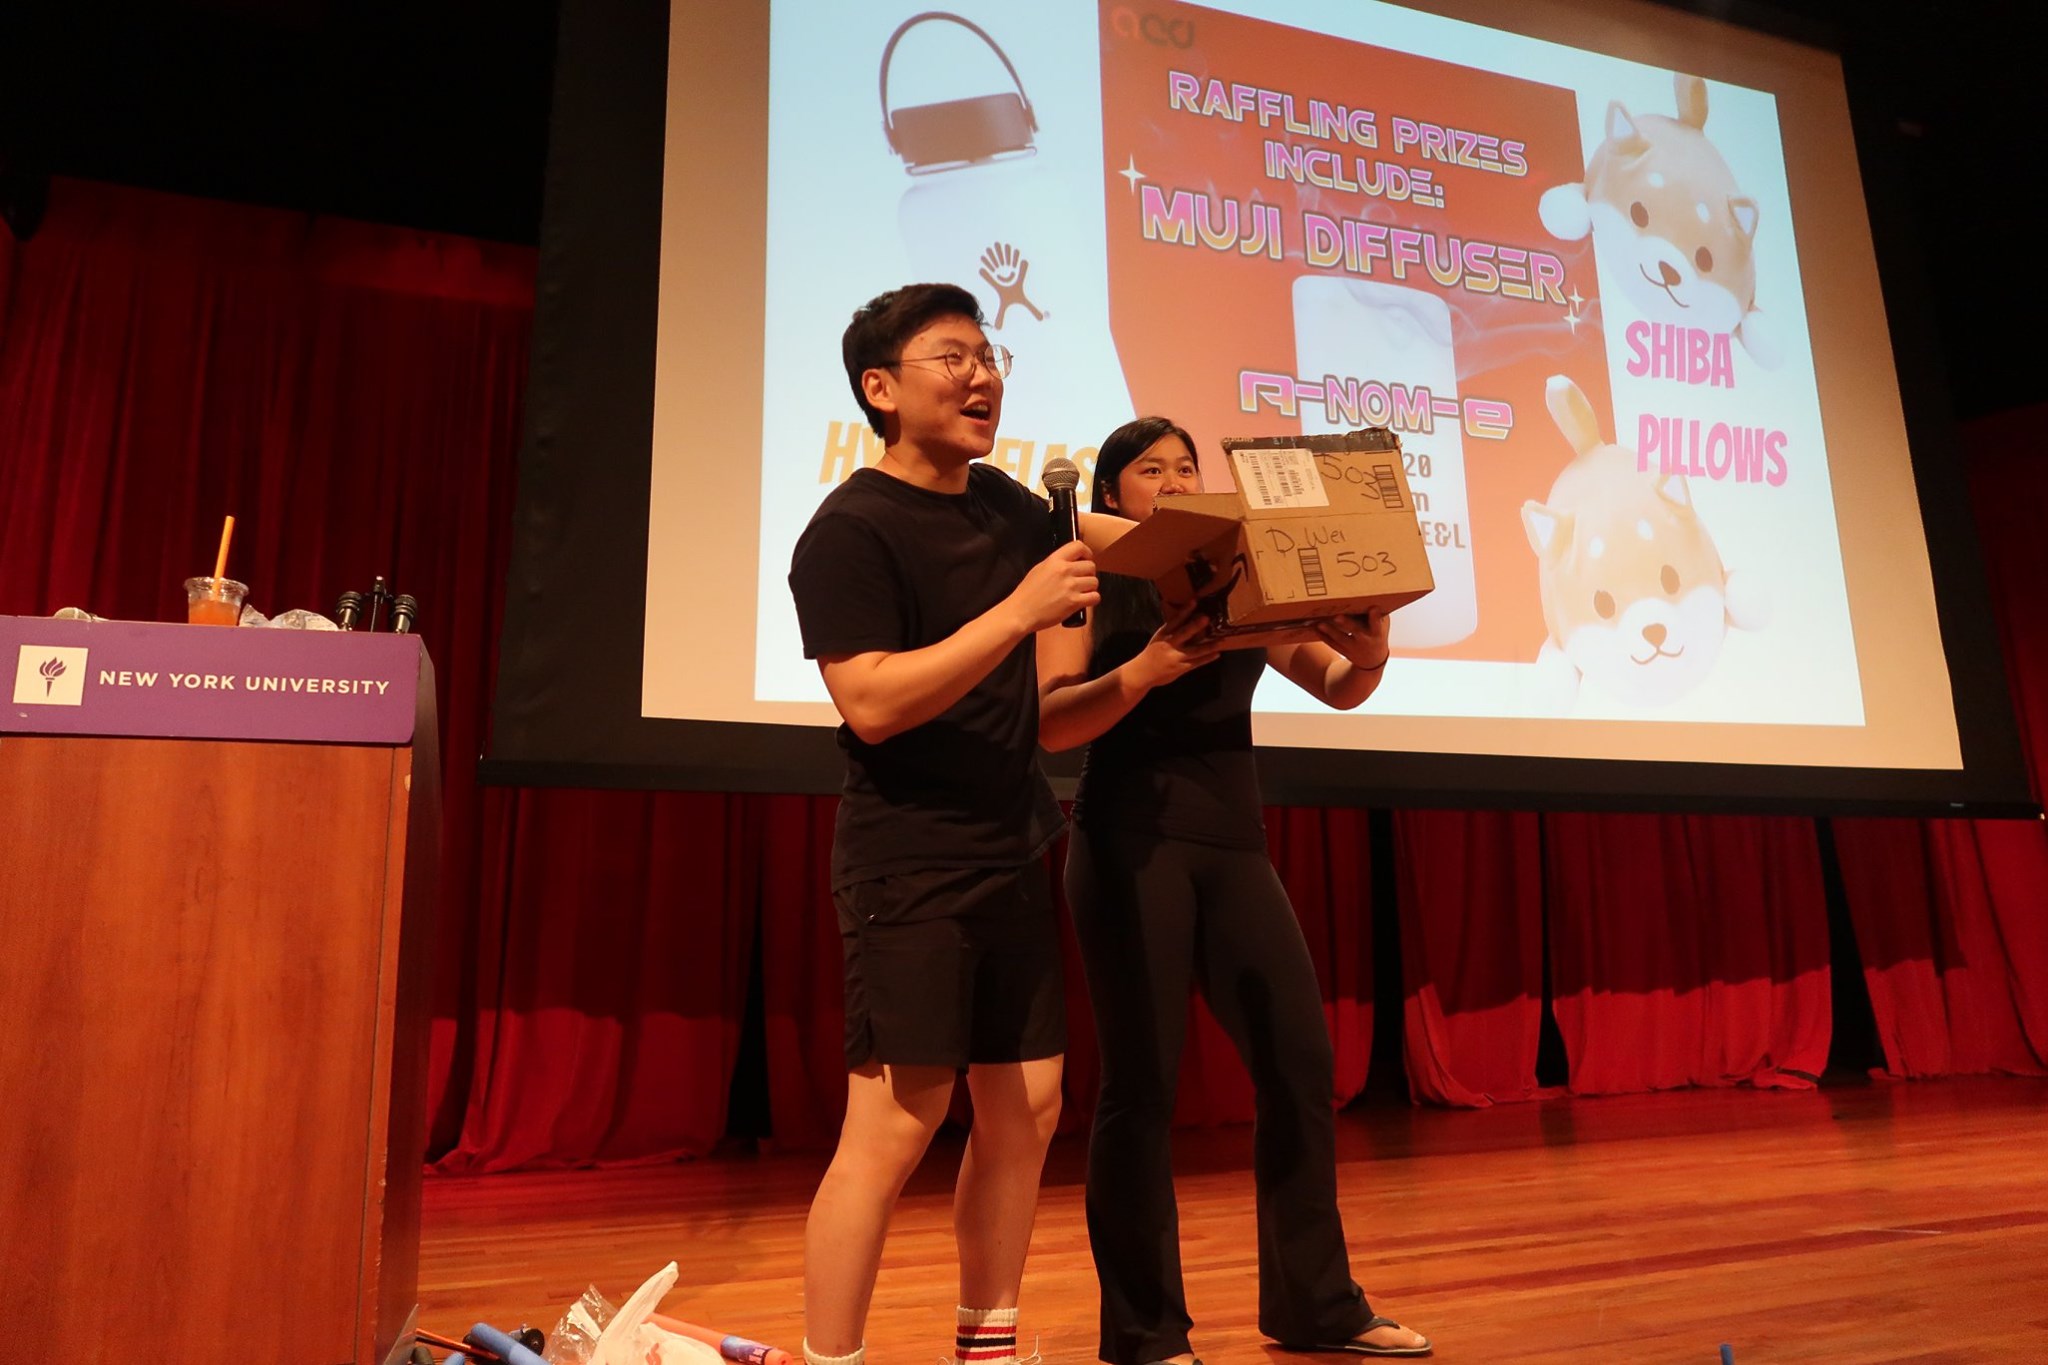 Two students on stage, drawing raffle tickets for prizes.